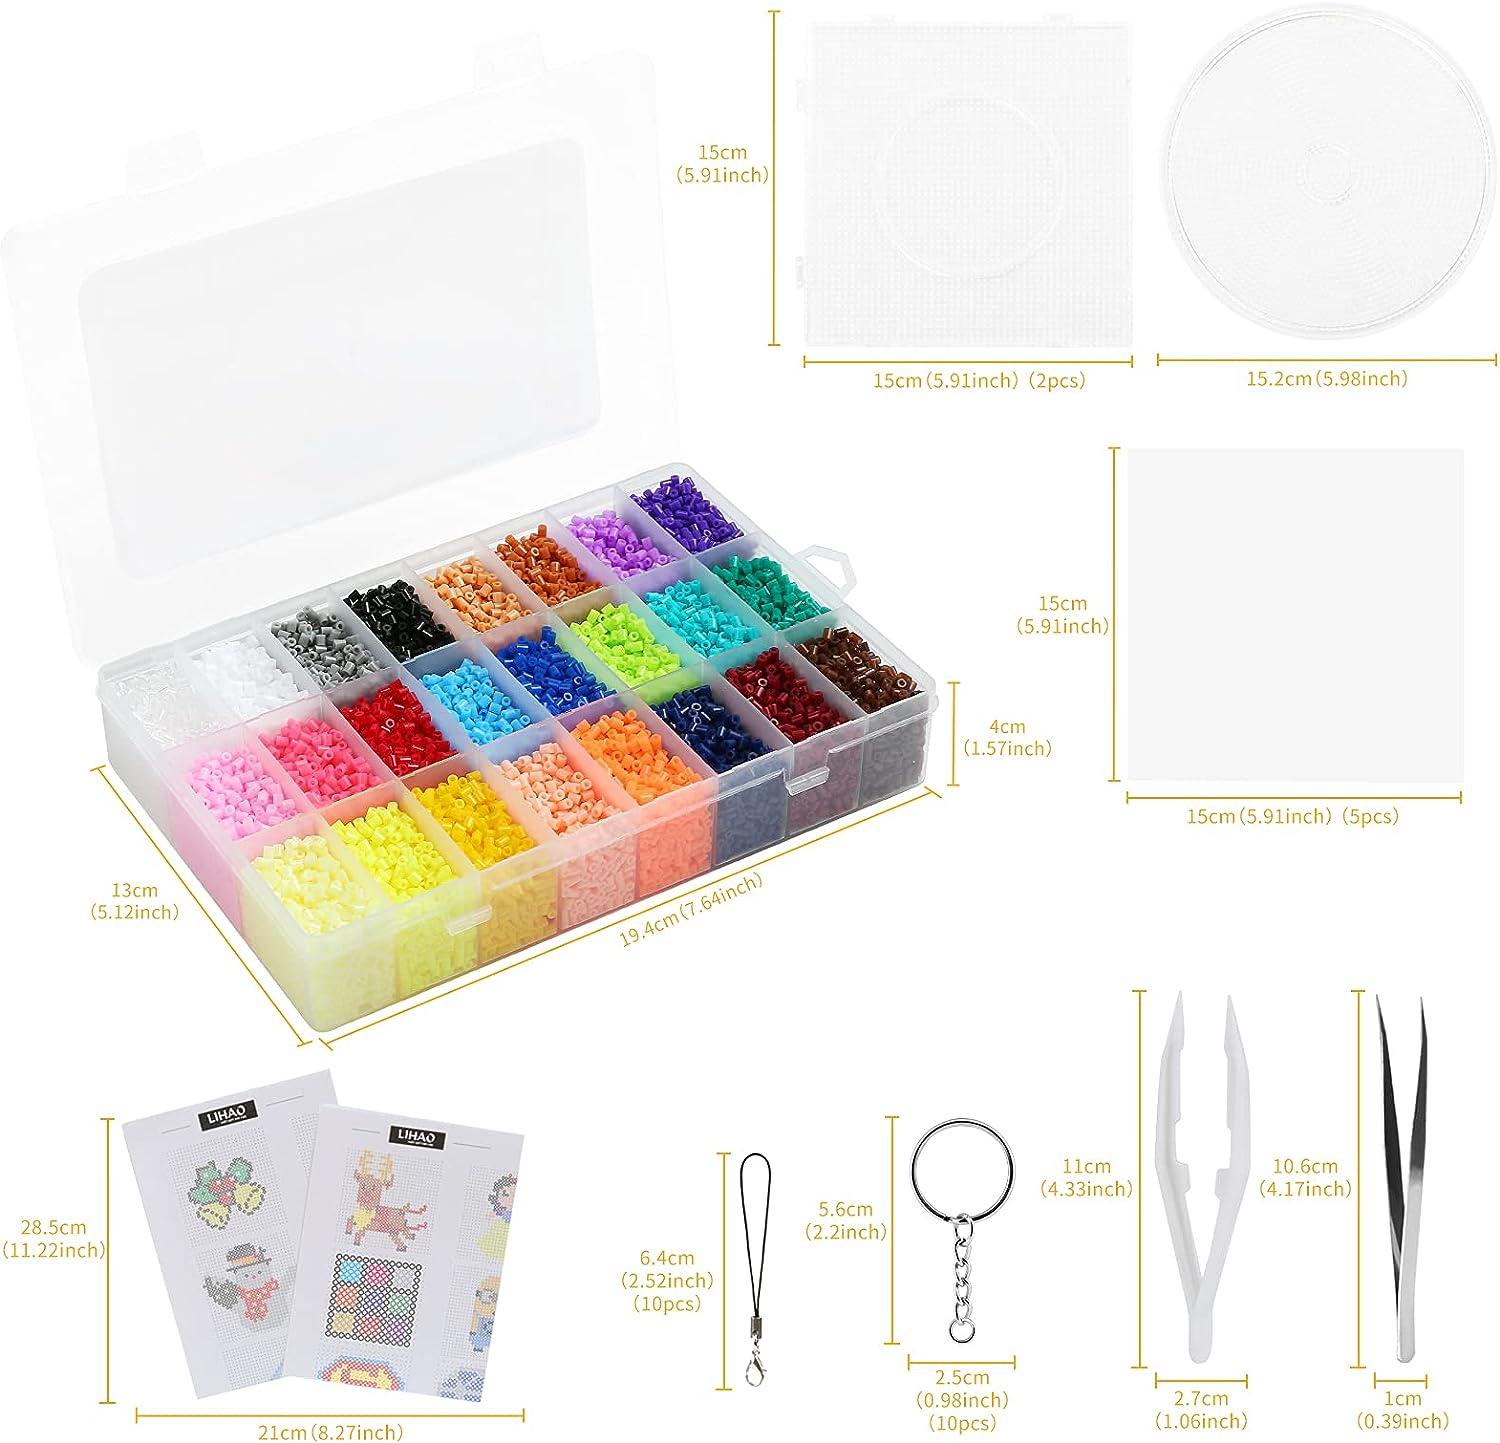 24000 Fuse Beads 24 Color 2.6mm Tiny Mini Fuse Beading Kit with Pegboards  Ironing Paper for Party Craft